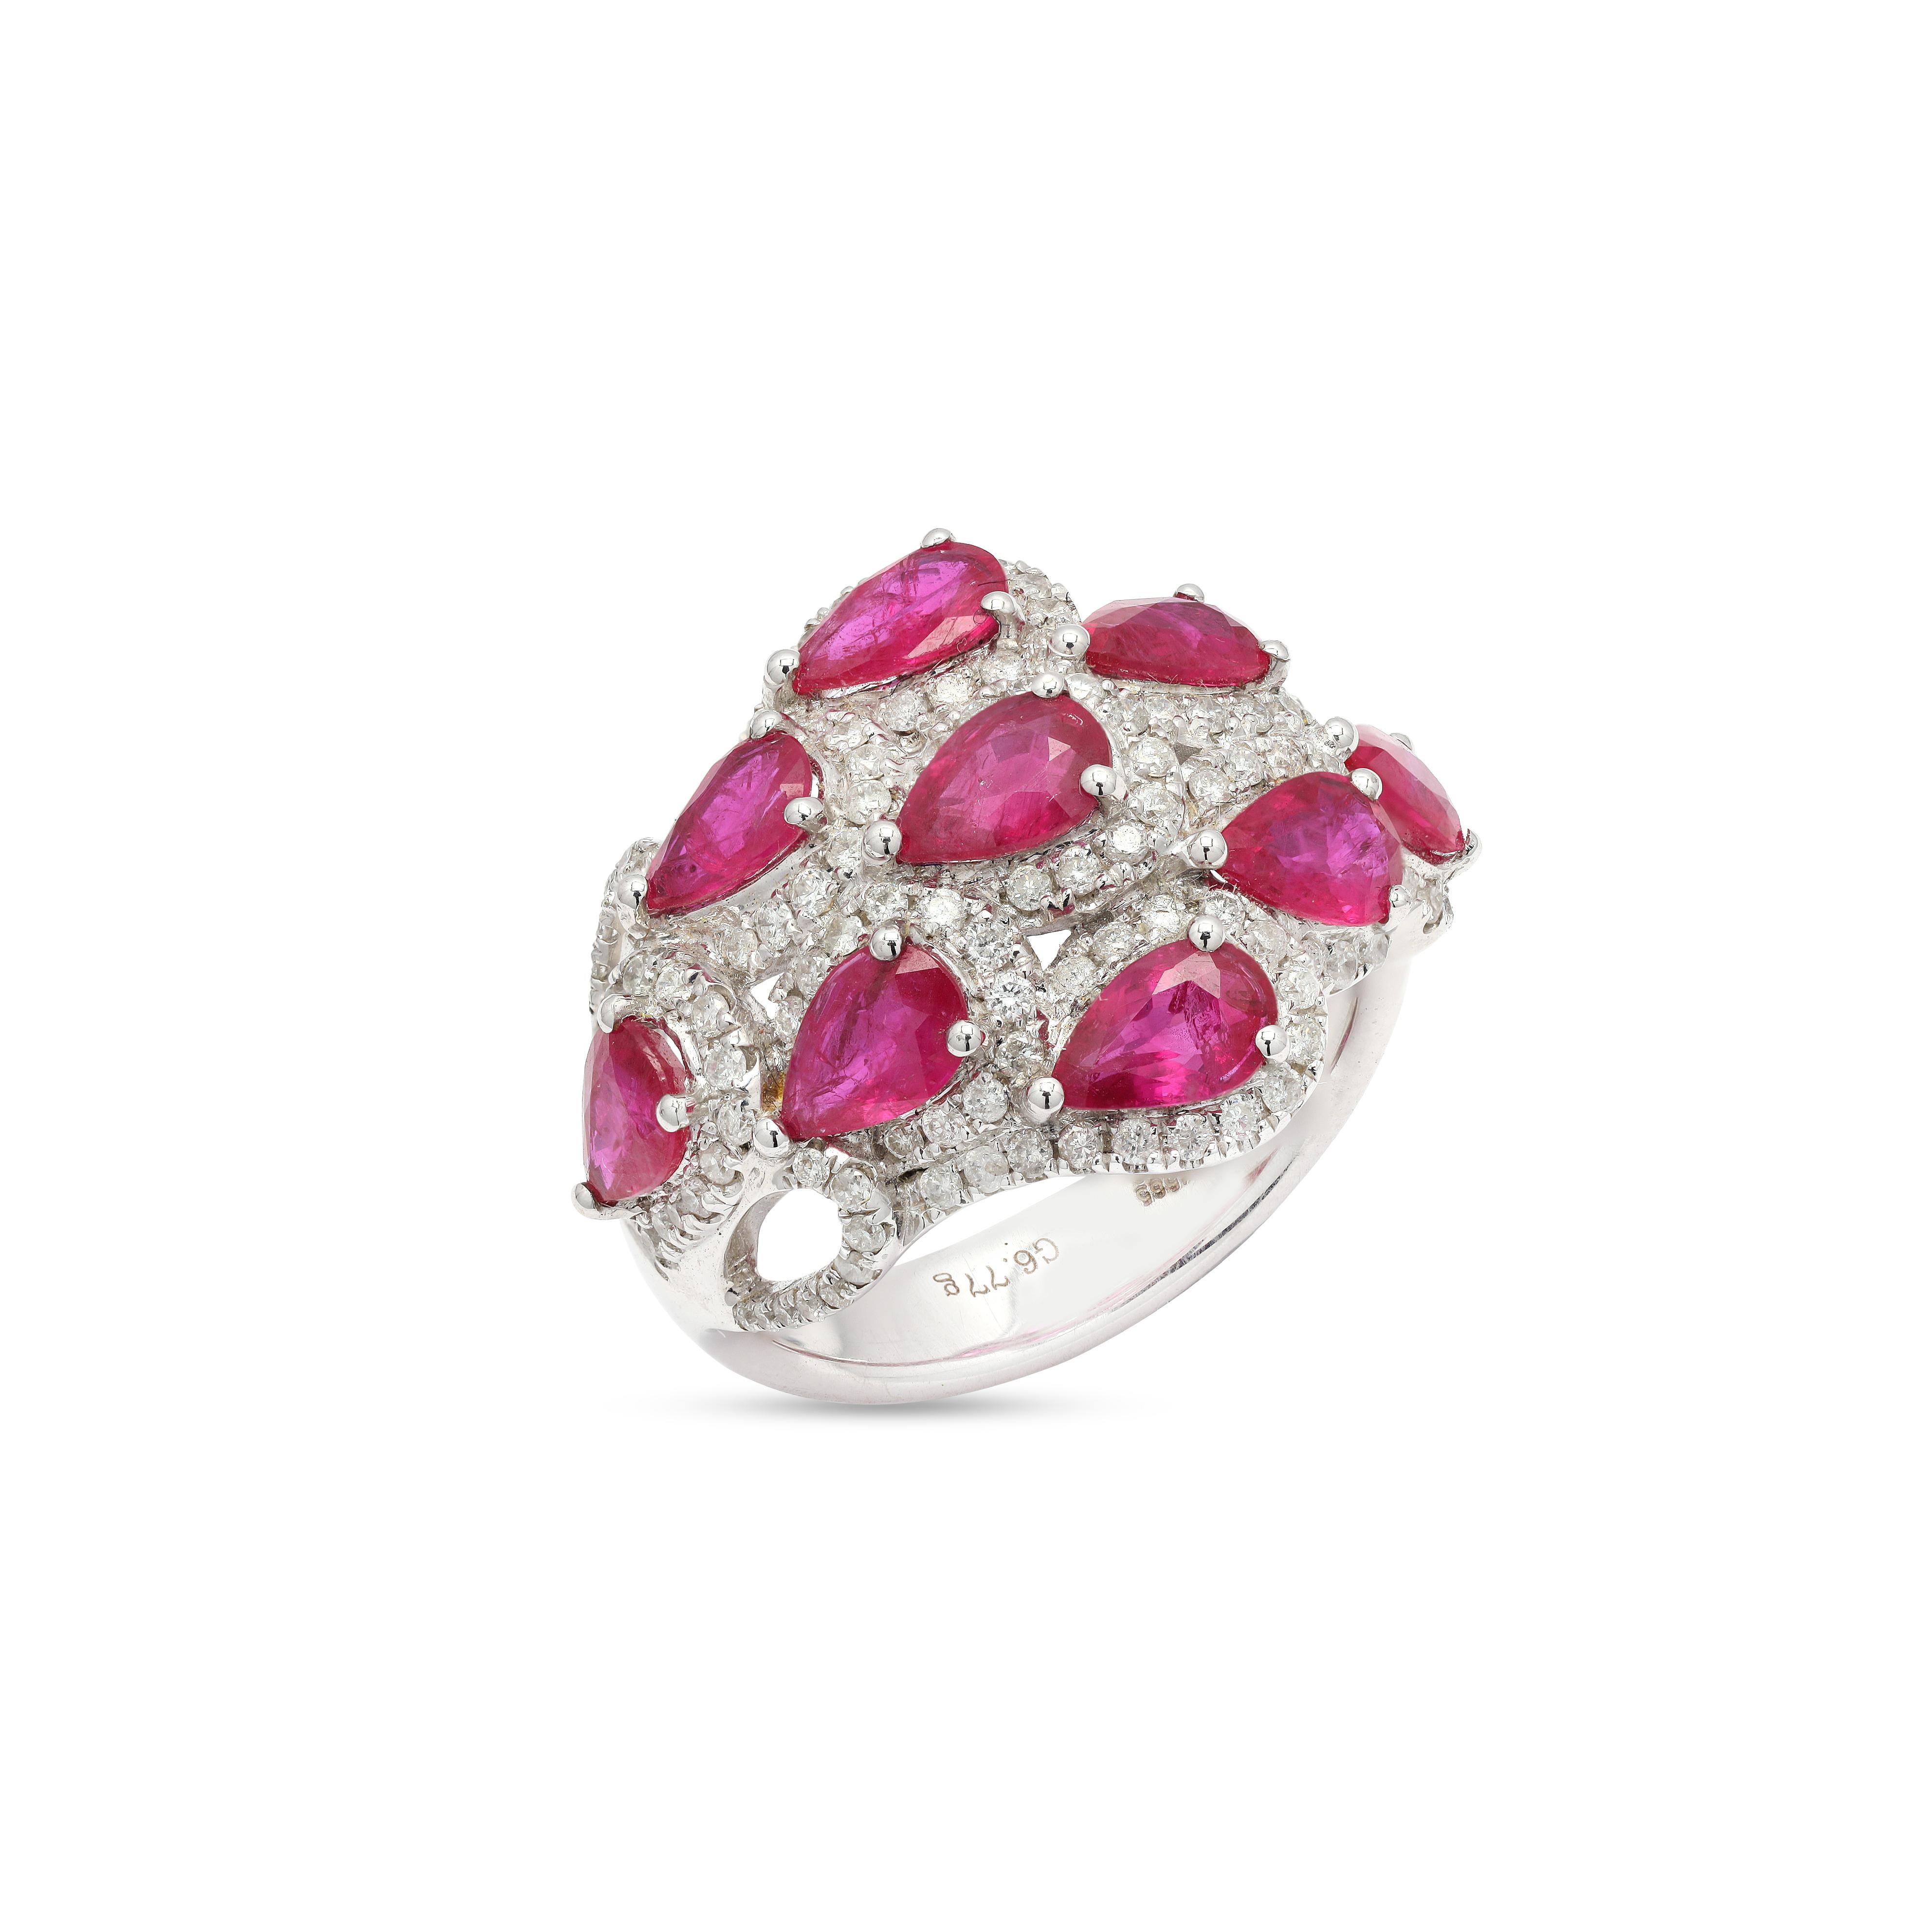 For Sale:  2.01 Carat Ruby and Diamond Cocktail Ring in 18K White Gold  5